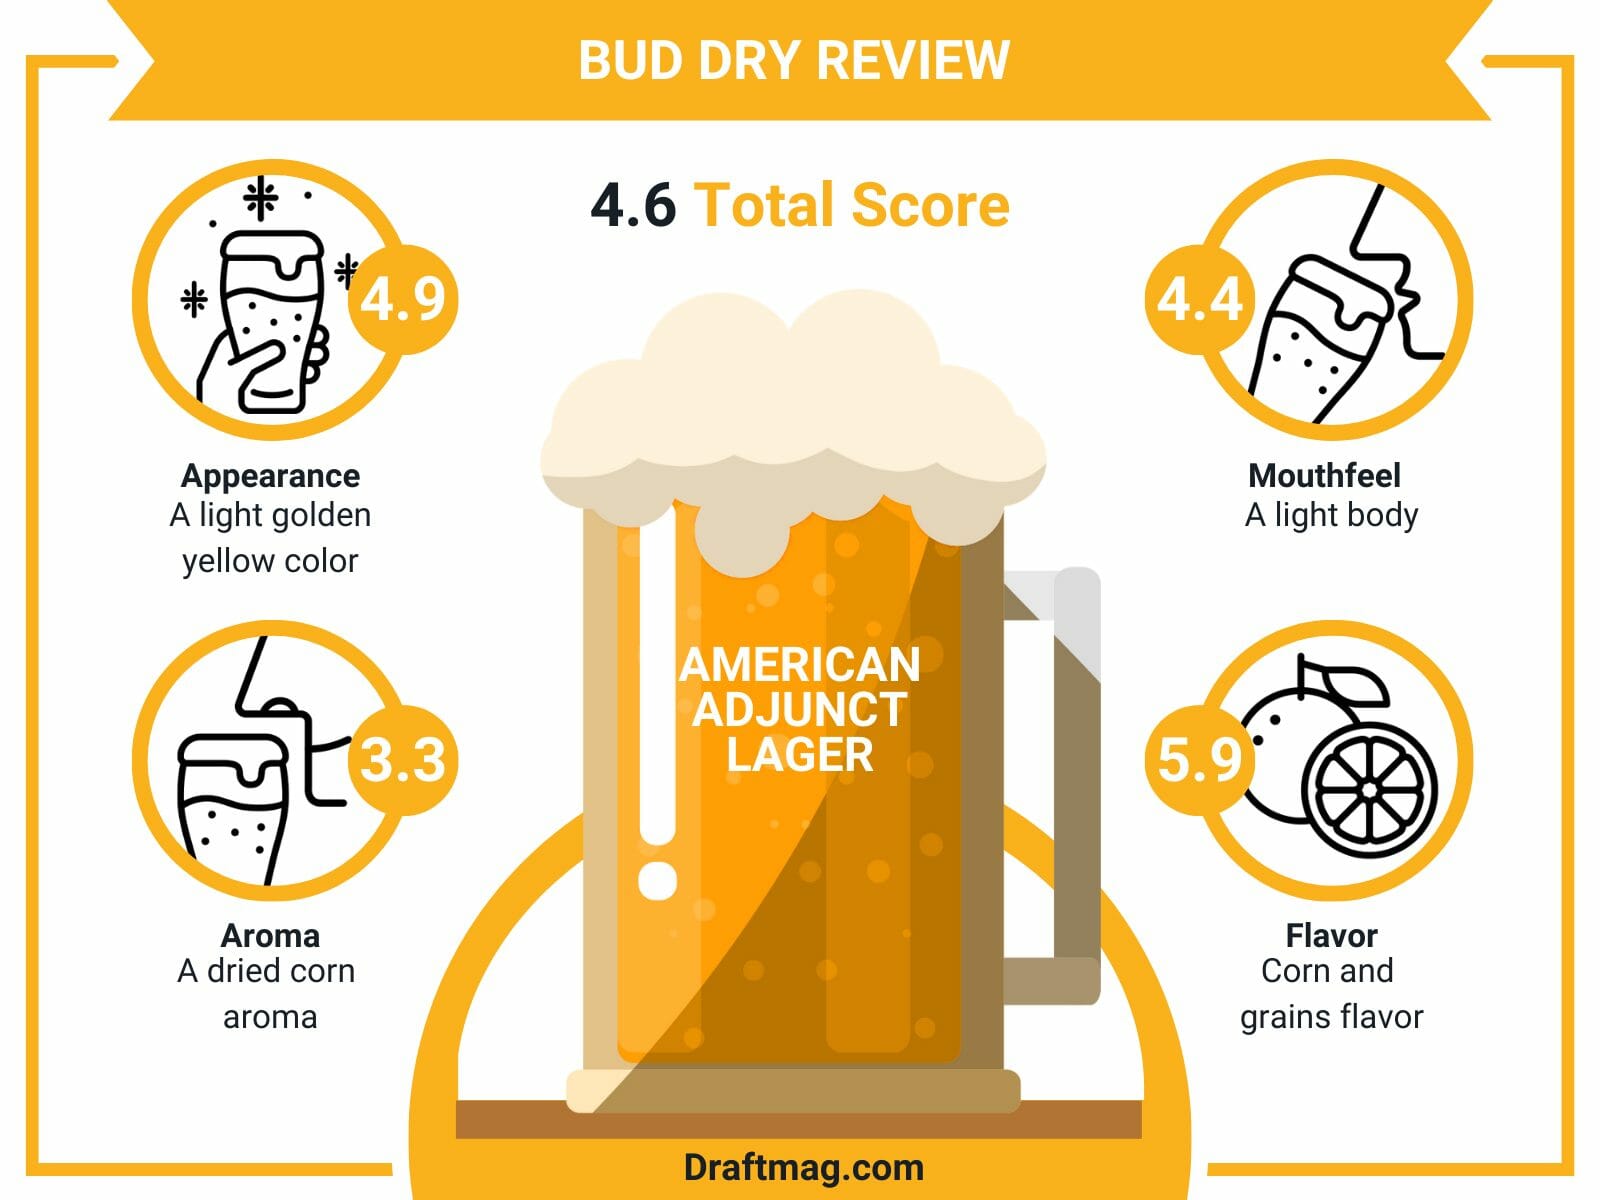 Bud dry review infographic